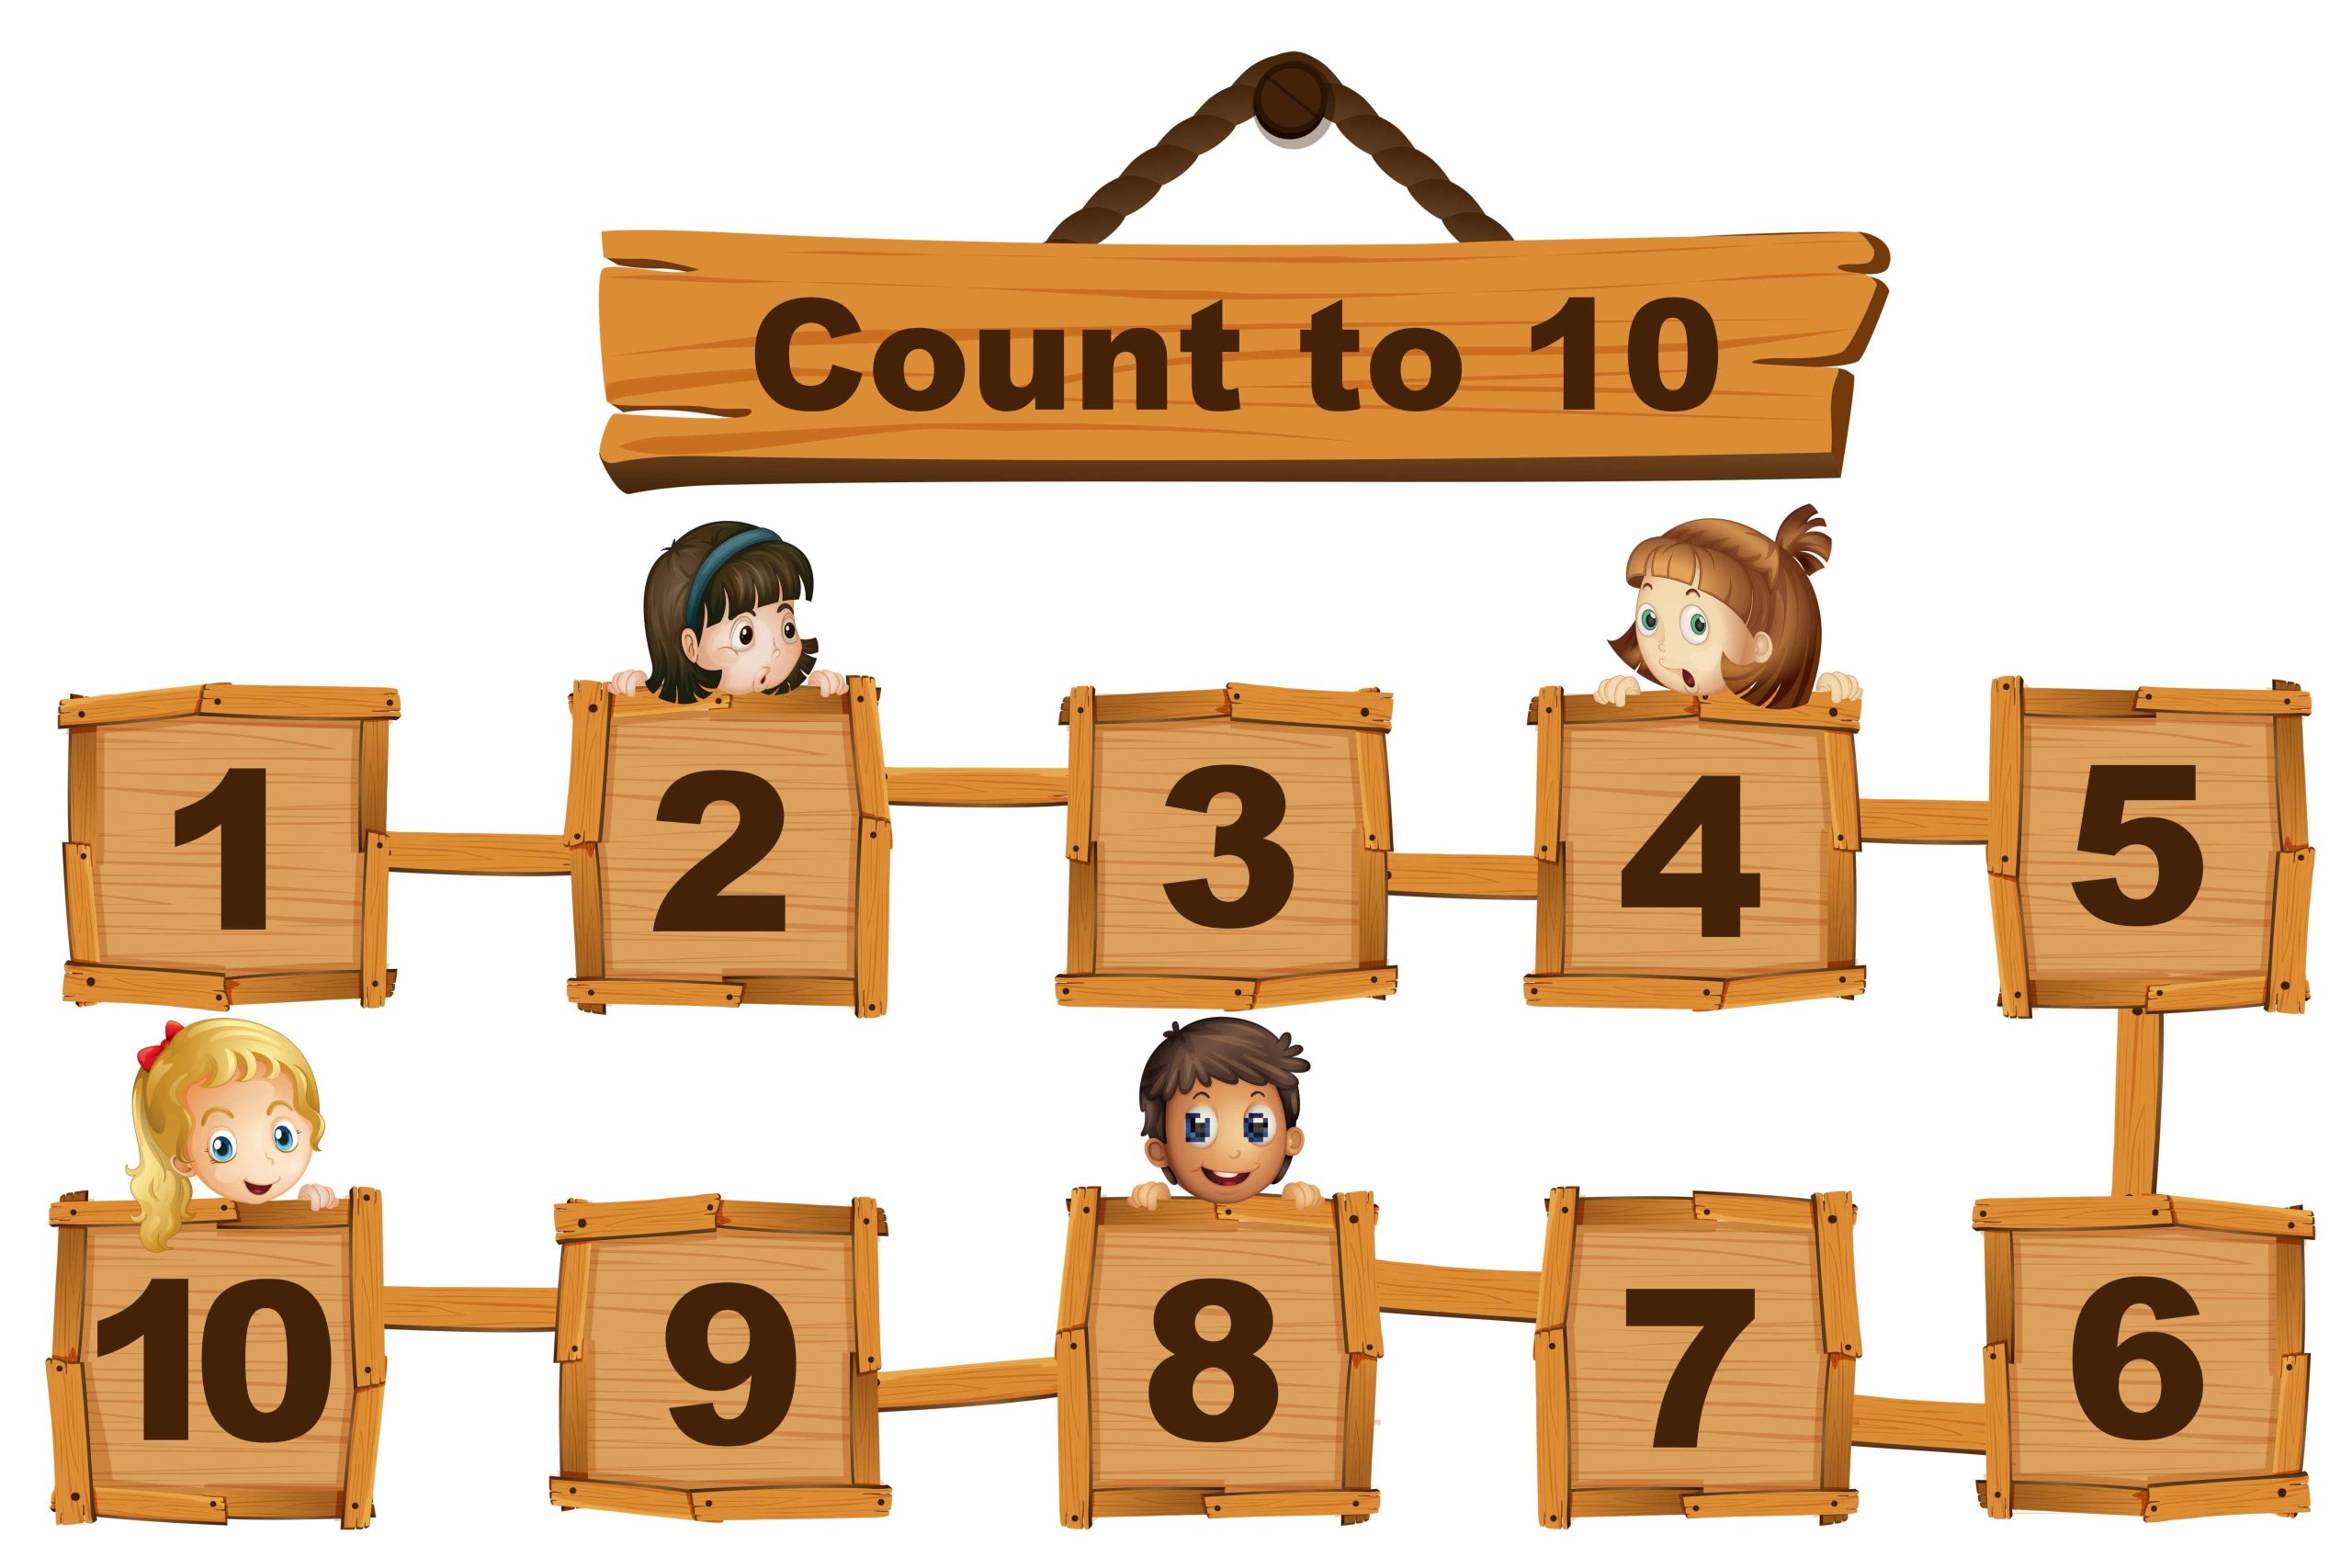 Concept of Counting